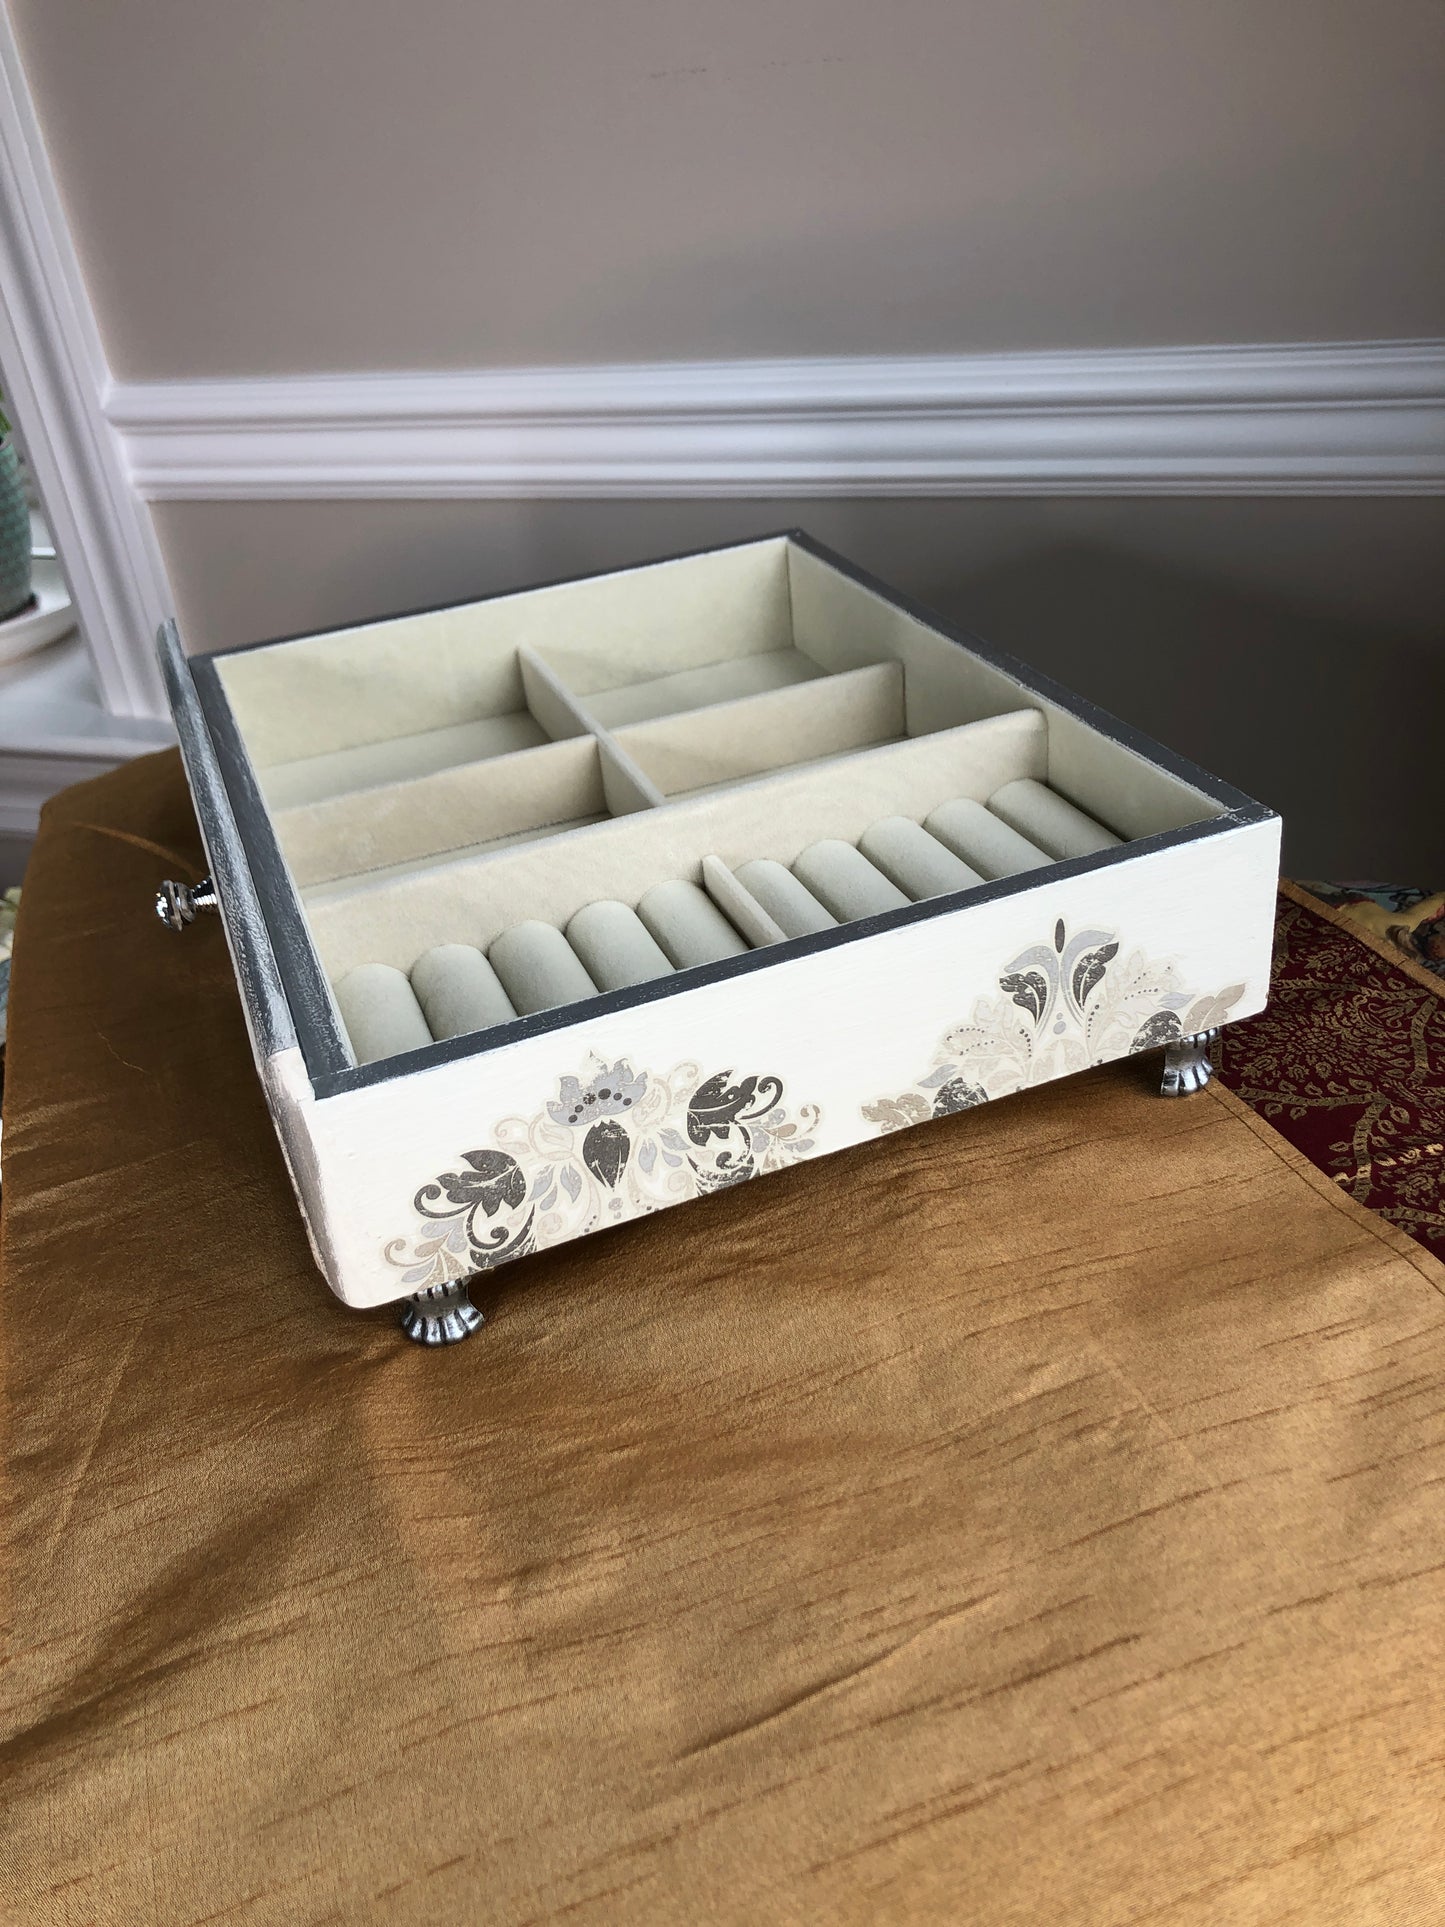 Elegant Damask Grab and Go Jewelry Tray, Small Table Top, Jewelry Organizer, Gray, Creams and White, Jewelry Box